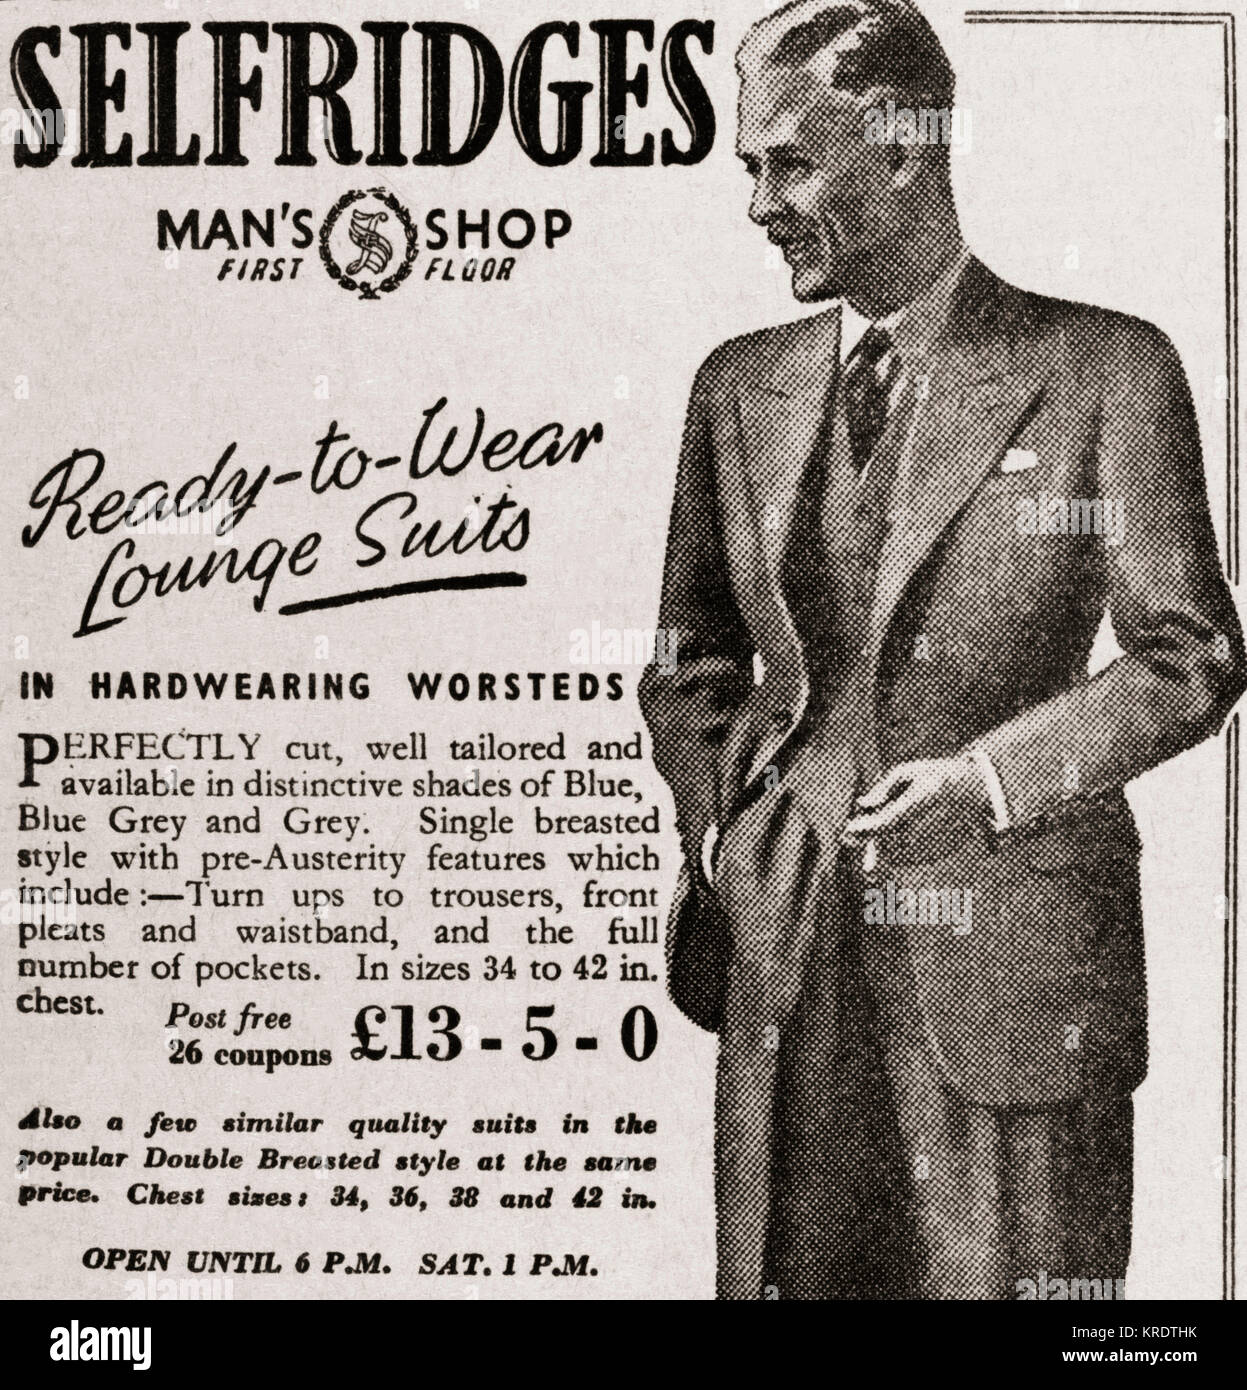 1943 advertisement for Selfridges Man's Shop.   From The Daily Telegraph, May 18th, 1943. Stock Photo